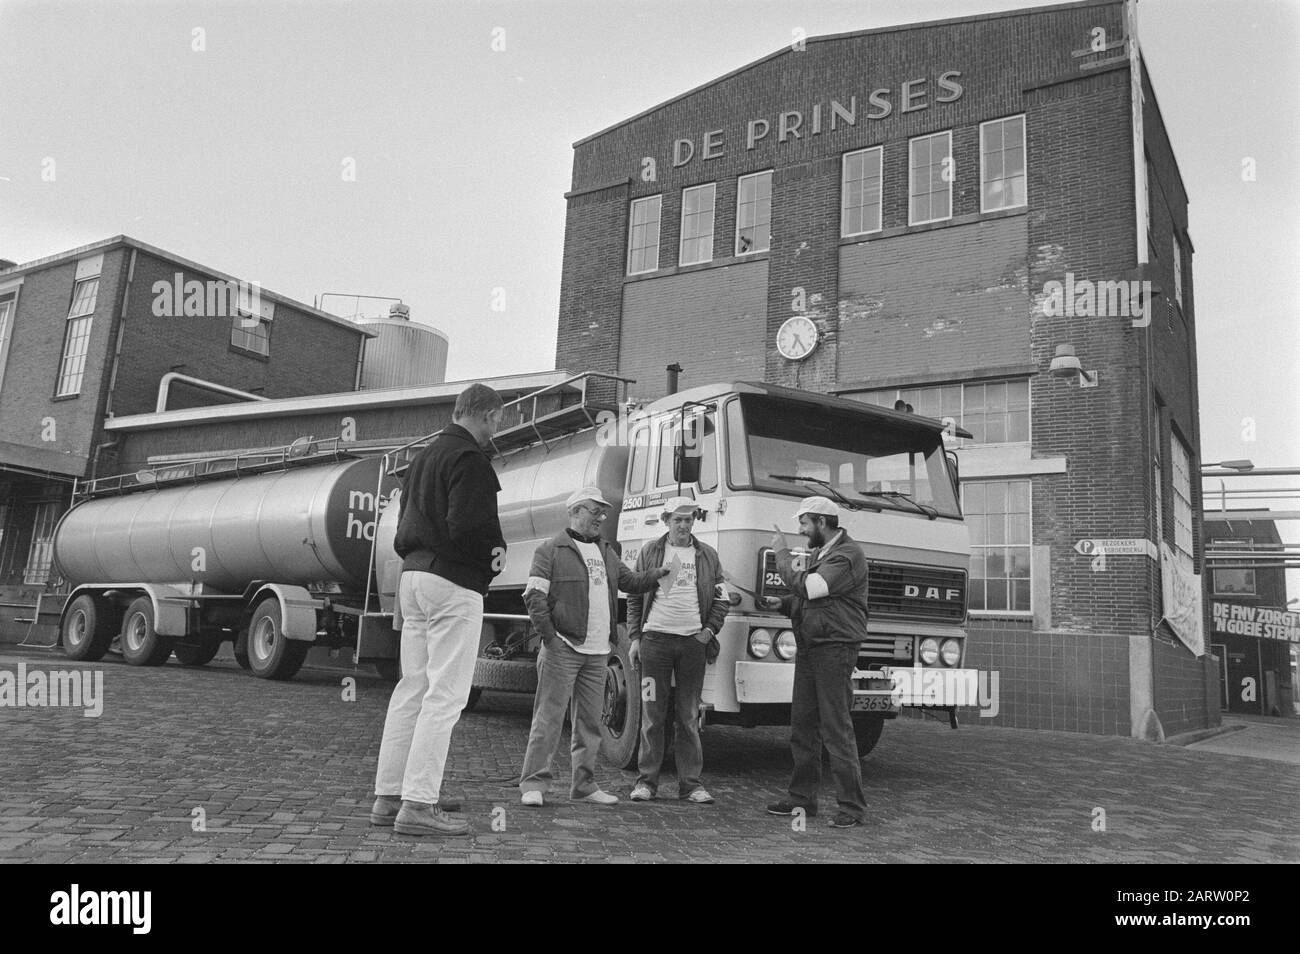 strike in dairy, dairy in ursem with last tanker with milk for making powder, with permission of strikers Date: May 1, 1986 Location: Ursem Keywords: factories, strikes, tankers Stock Photo